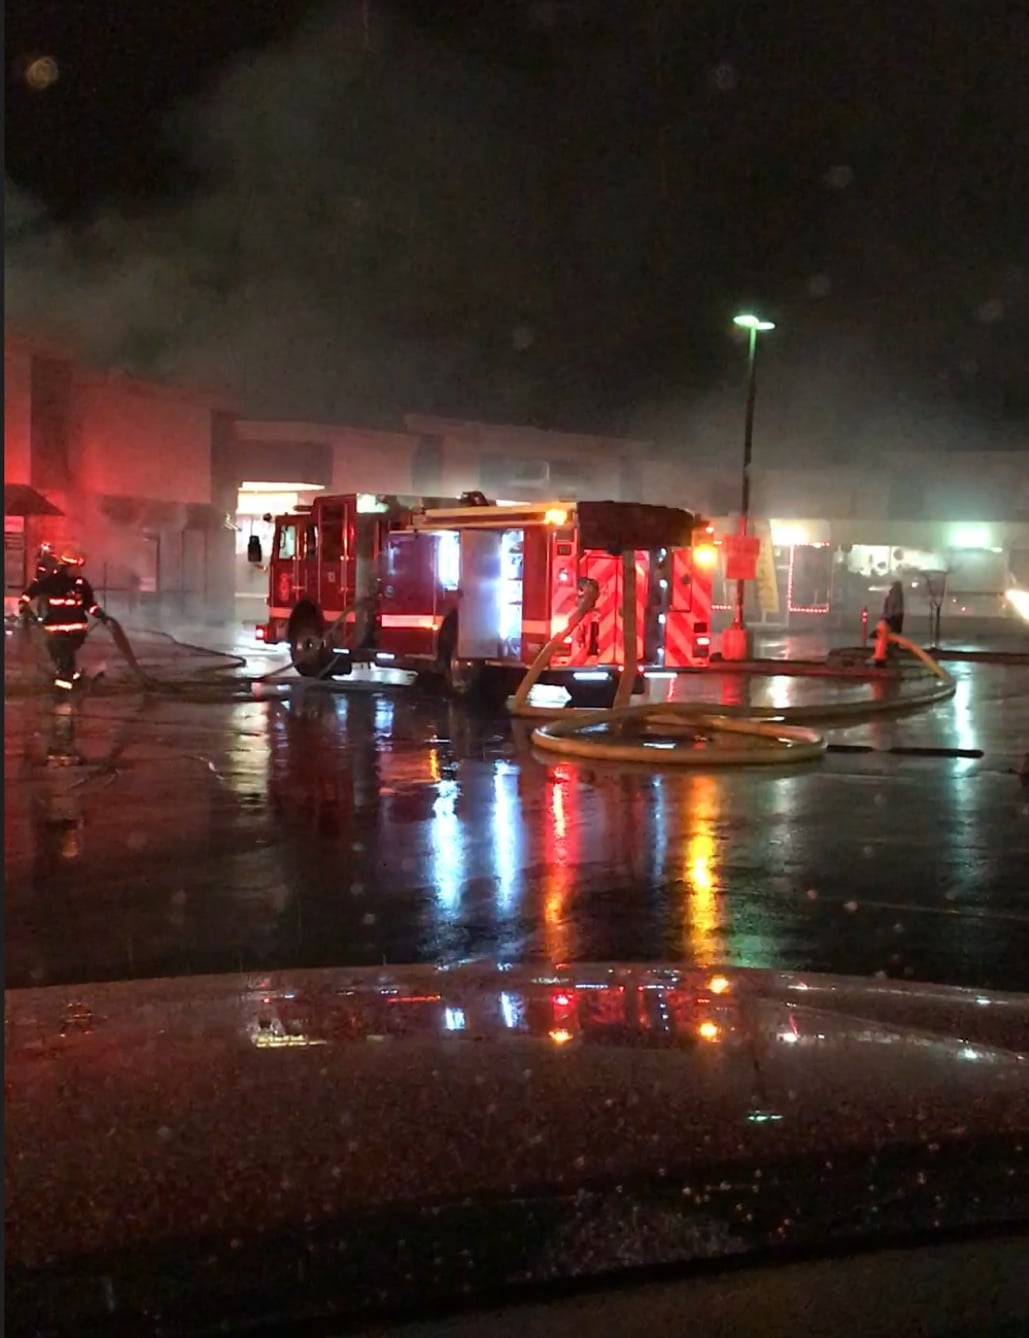 A two-alarm fire damaged a small retail clothing store early Sunday in Bagley Downs.